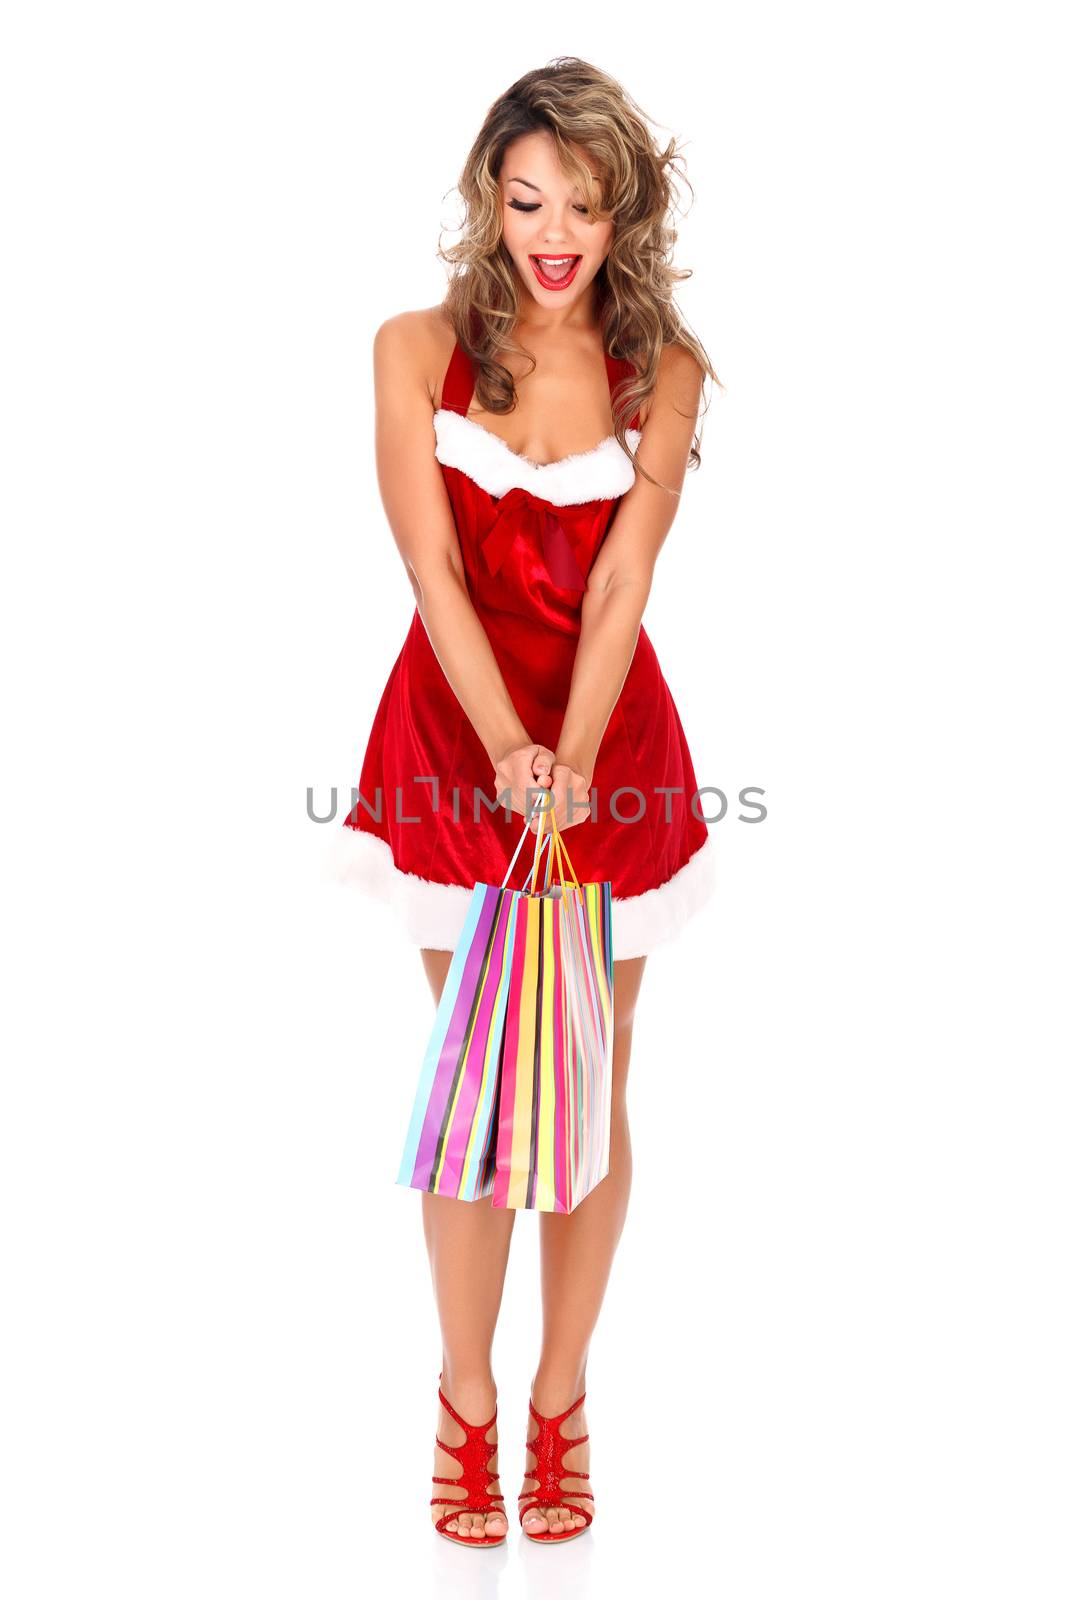 Surprised girl with shopping bag, white background, copyspace